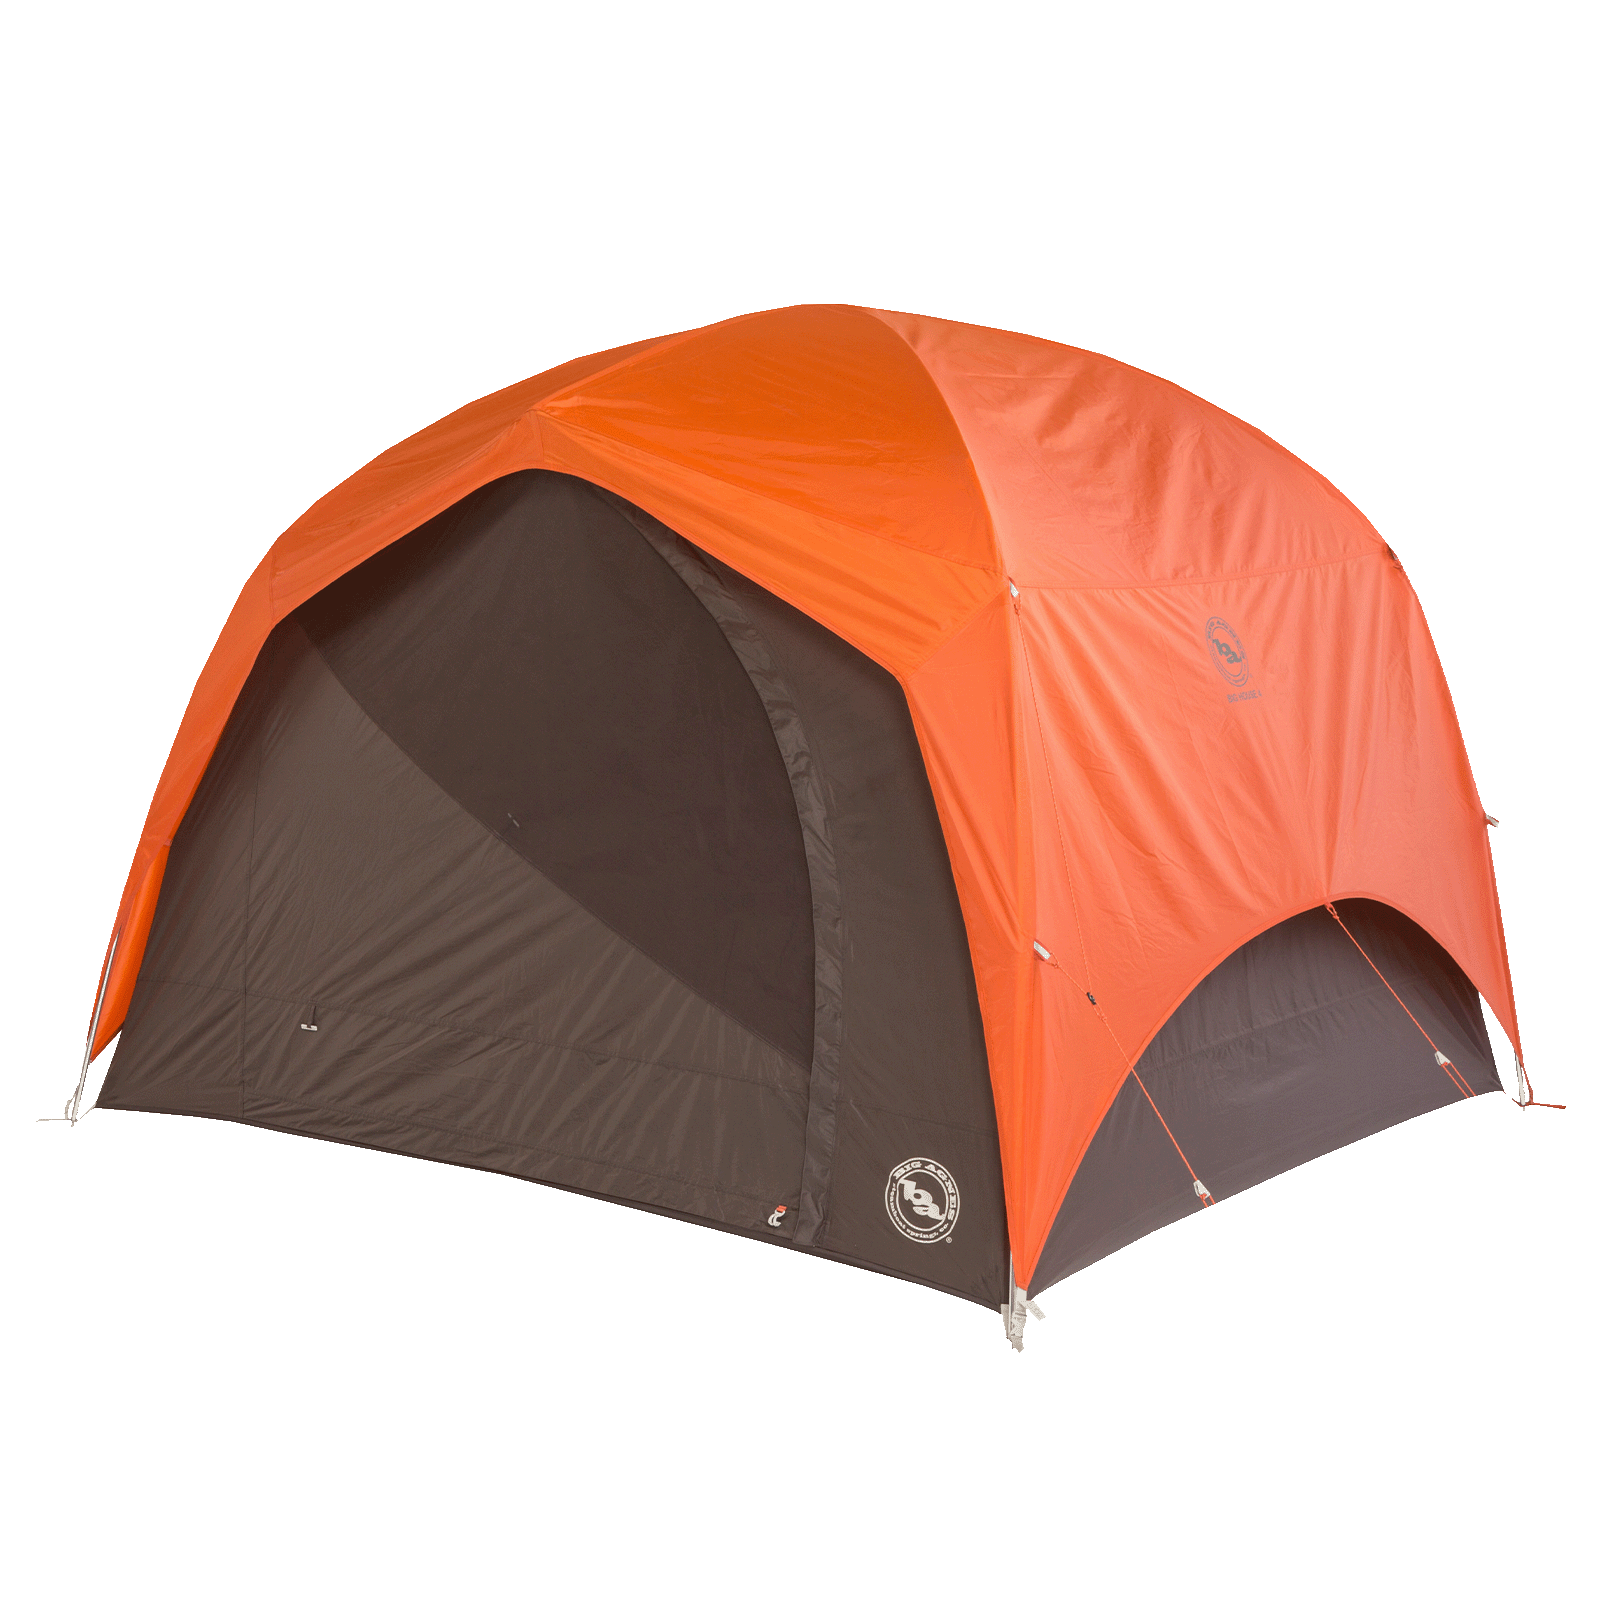 Tents to Tech: 10 products you need for your next camping trip